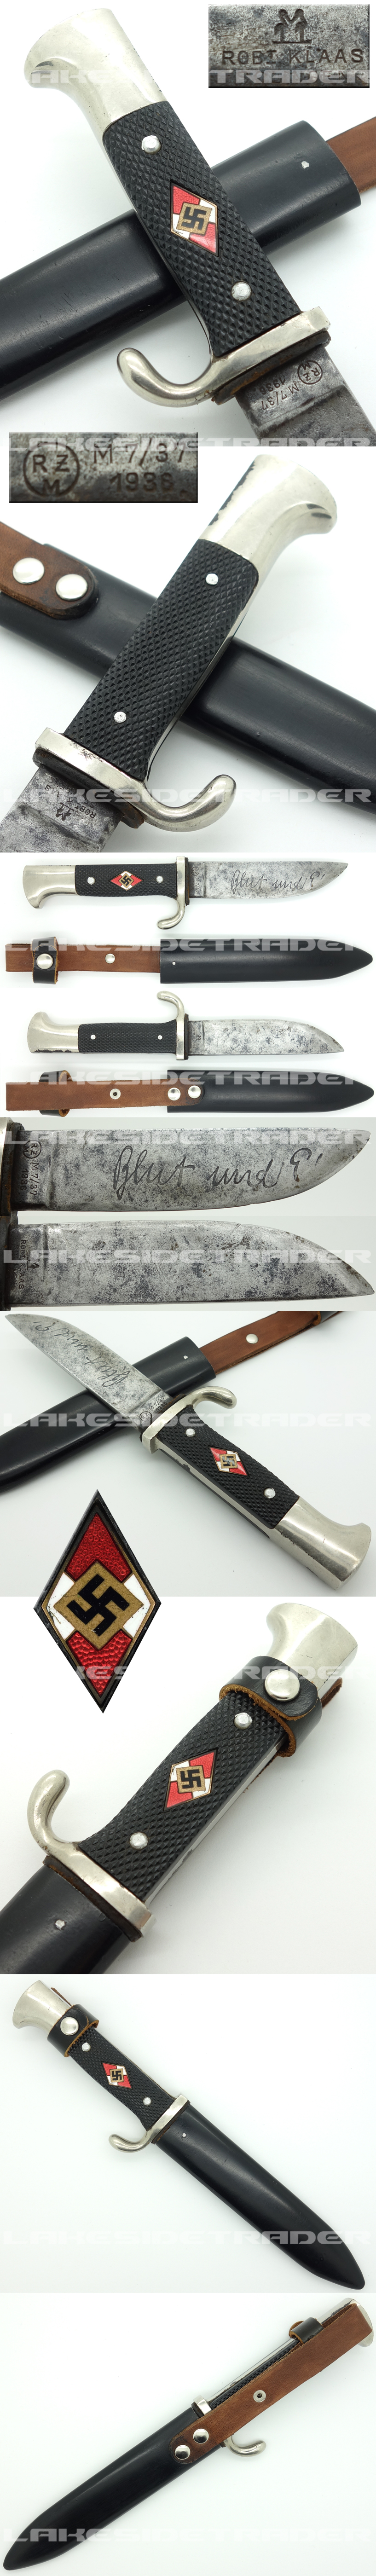 Transitional Hitler Youth Knife by Rbt. Klaas 1936